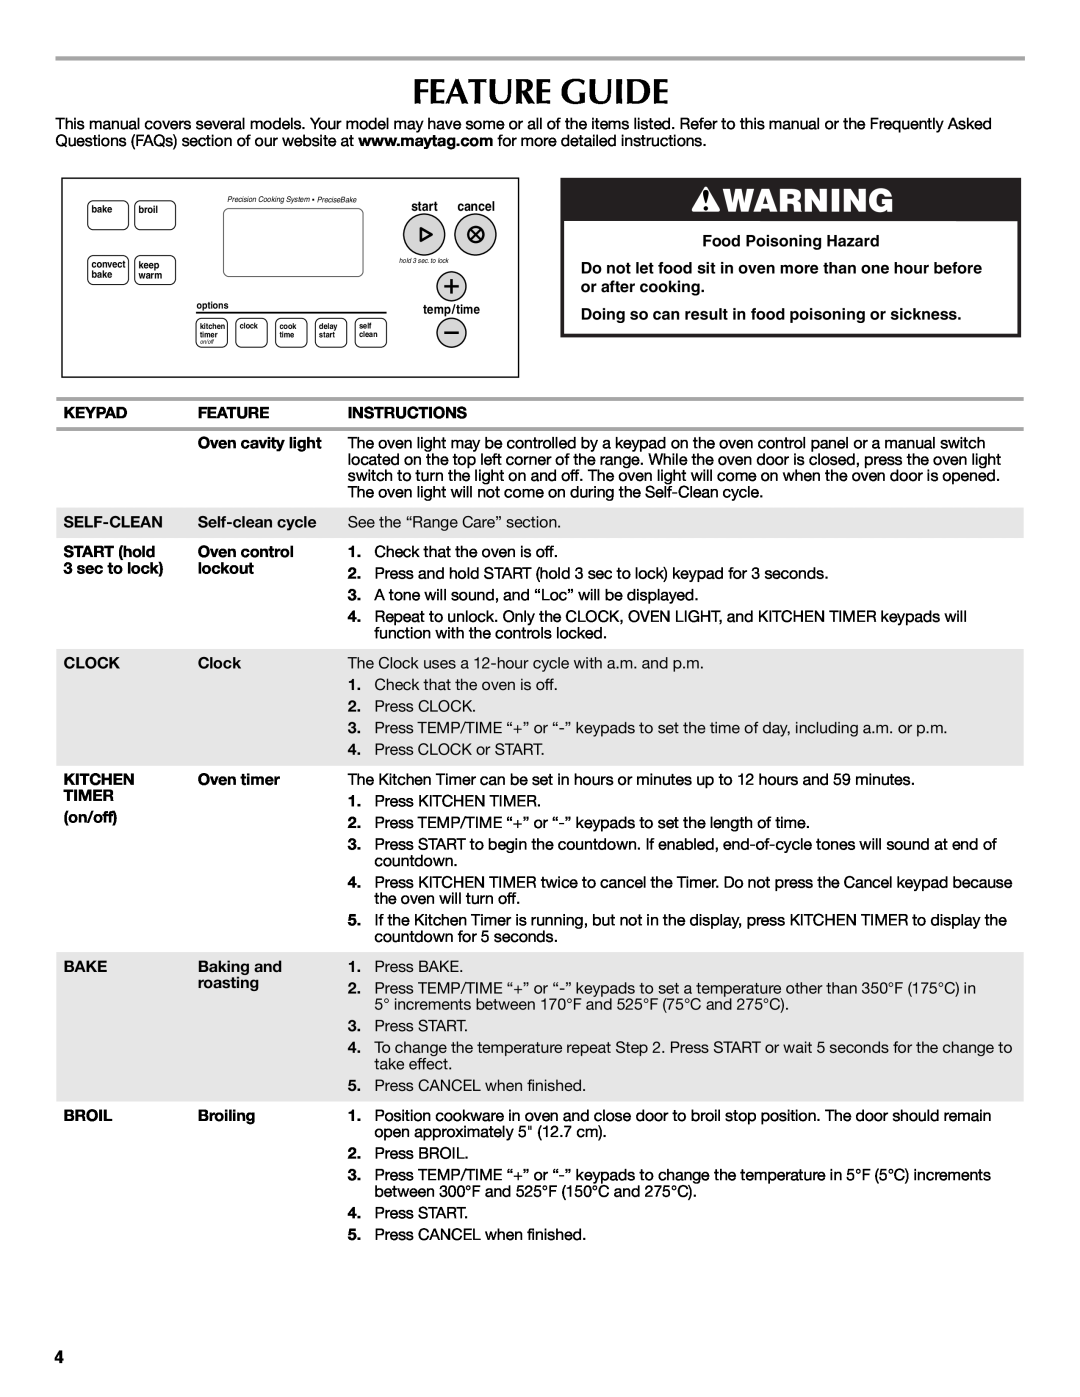 Maytag W10234645A, W10238819A Feature Guide, Food Poisoning Hazard, Doing so can result in food poisoning or sickness 